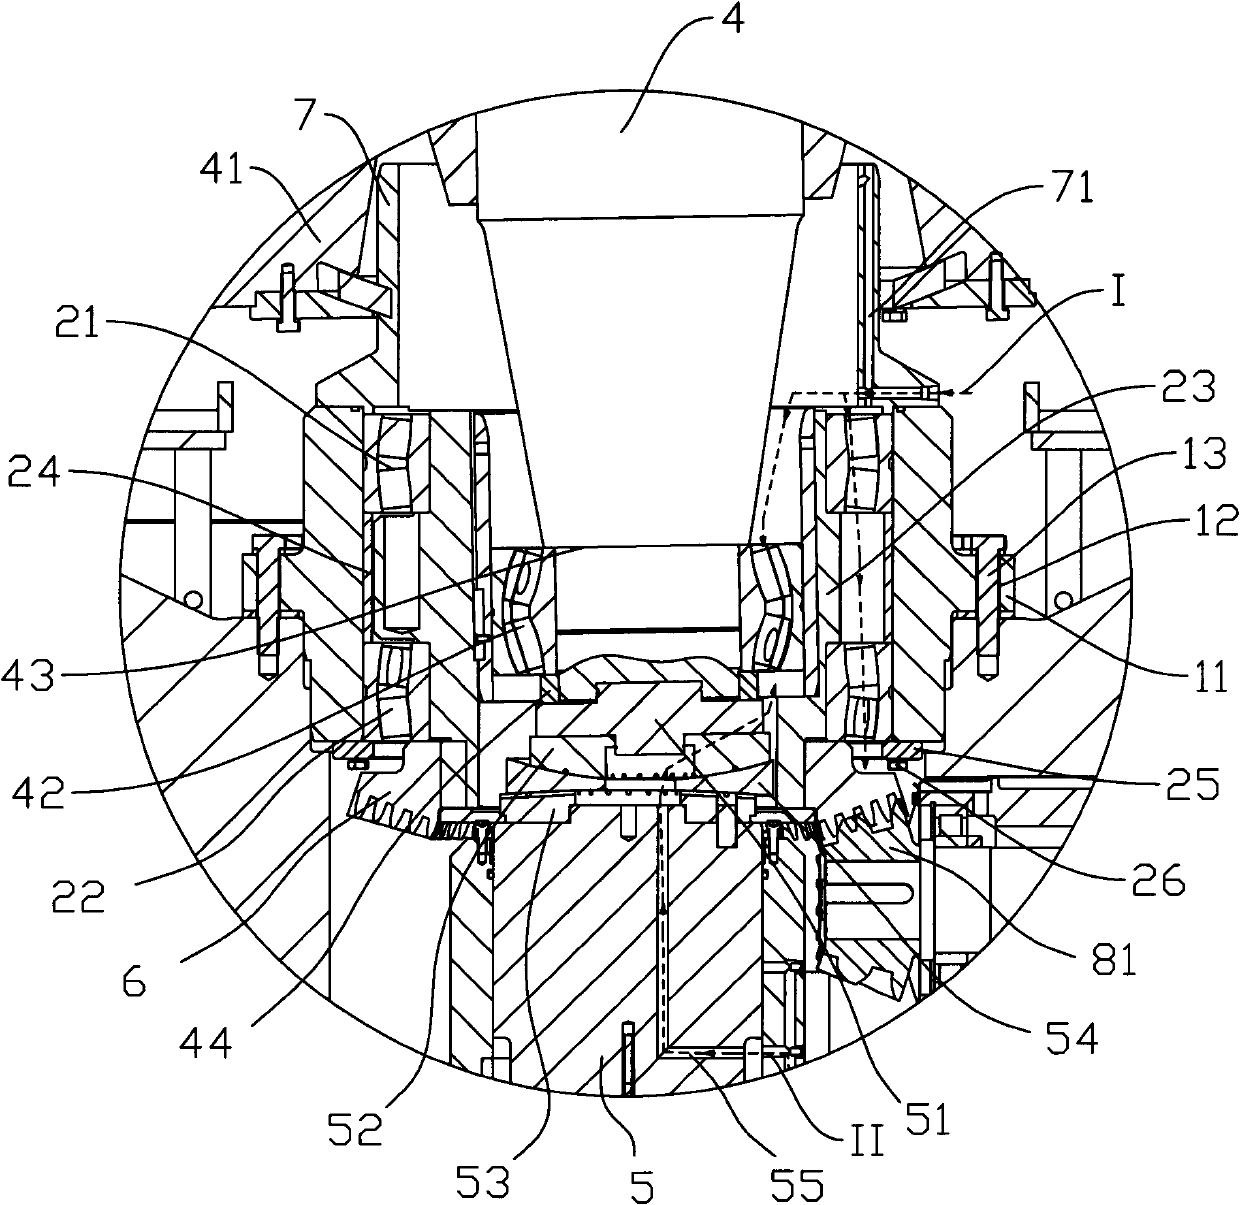 Eccentric sleeve mechanism for cone crusher